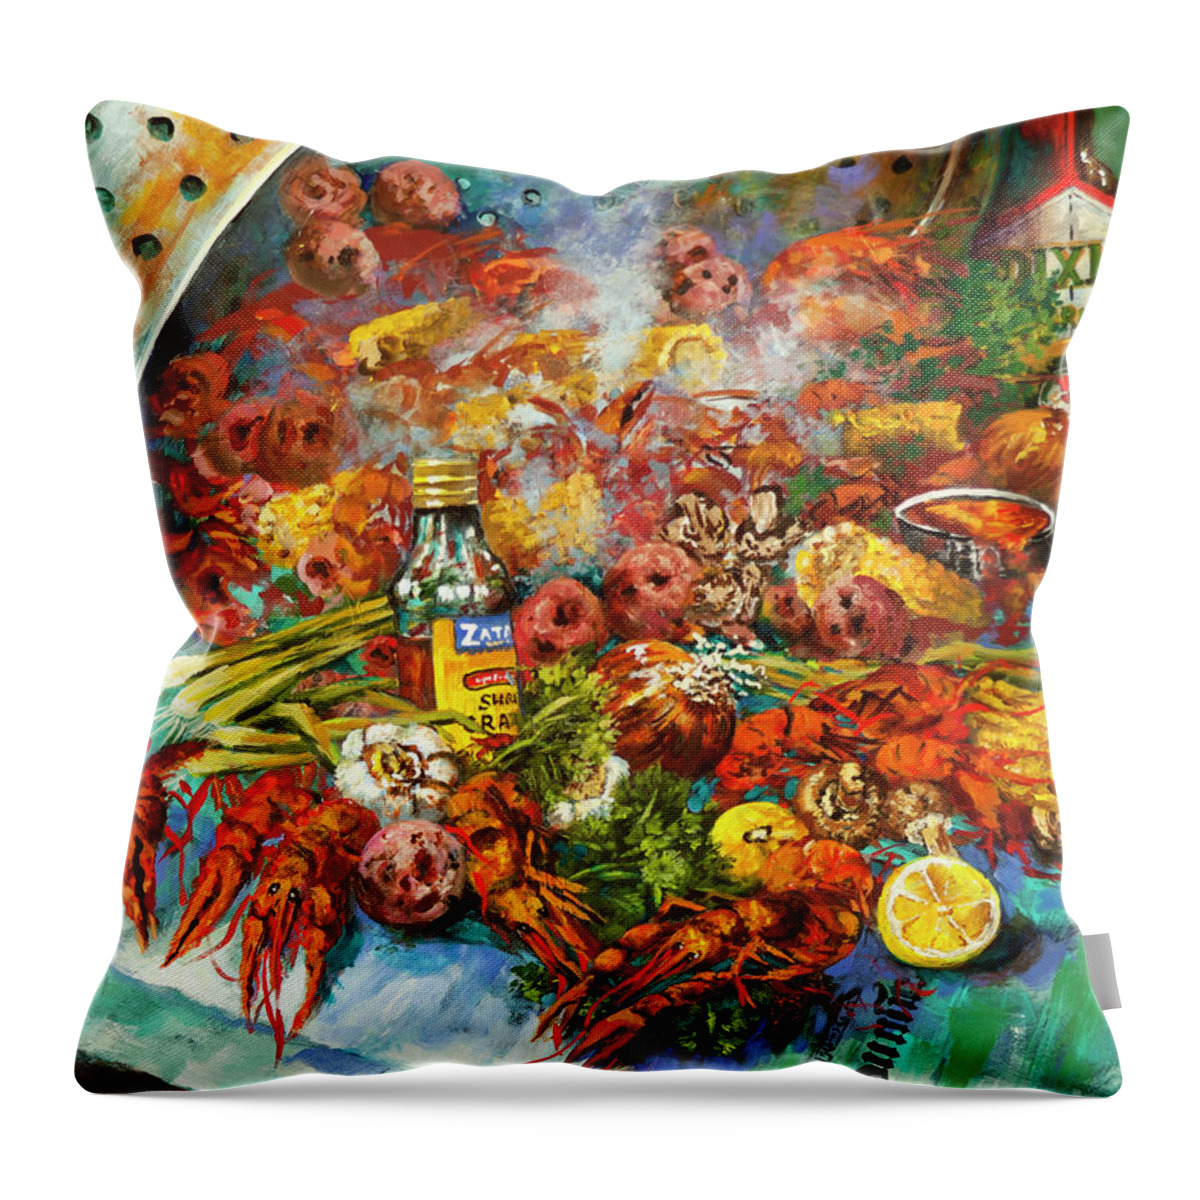 New Orleans Food Throw Pillow featuring the painting Crawfish Time by Dianne Parks